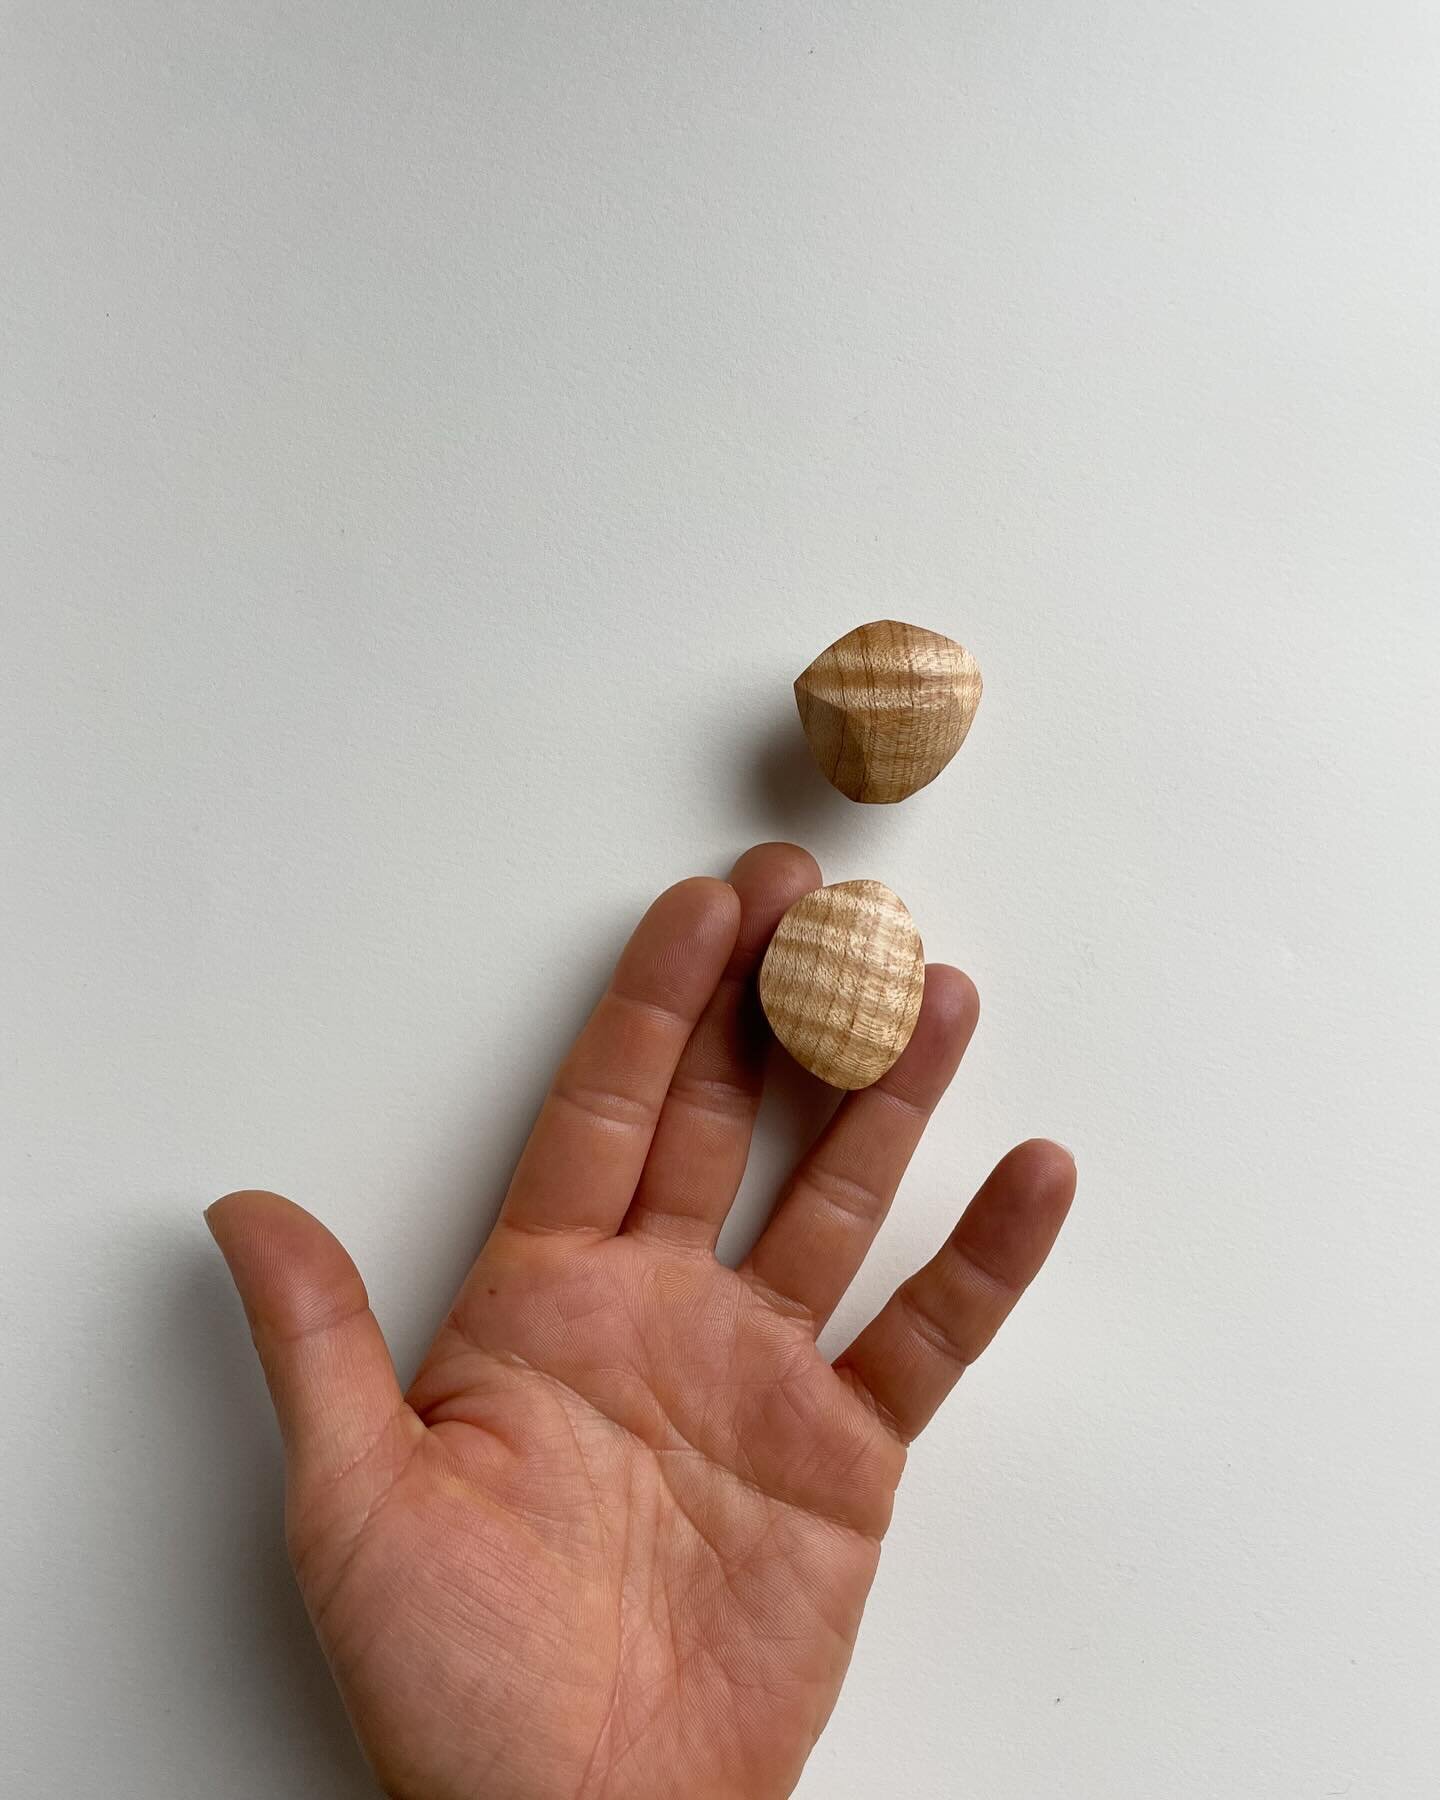 what if your cabinet knobs felt like precious gems in your hand? each one hand carved and unique ✨ a reminder to be present in your daily life

Curly maple &amp; brass
knobs ~ roughly 1 - 1.25&rdquo; x 1&rdquo;
Pulls ~ roughly 4&rdquo; x 1&rdquo;

a 